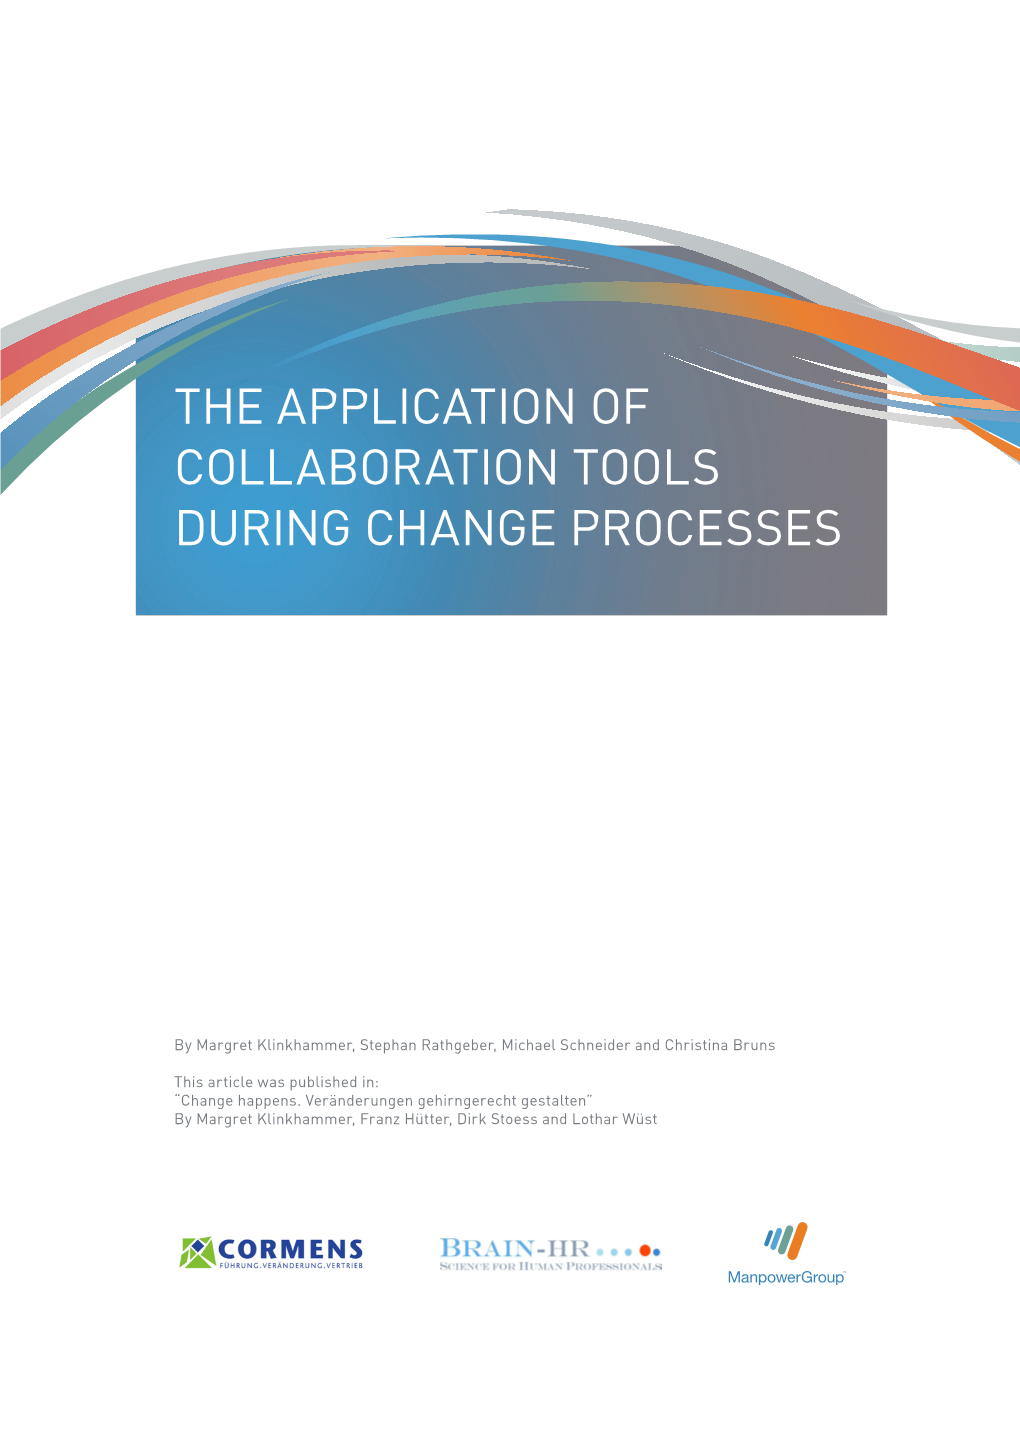 The Application of Collaboration Tools During Change Processes